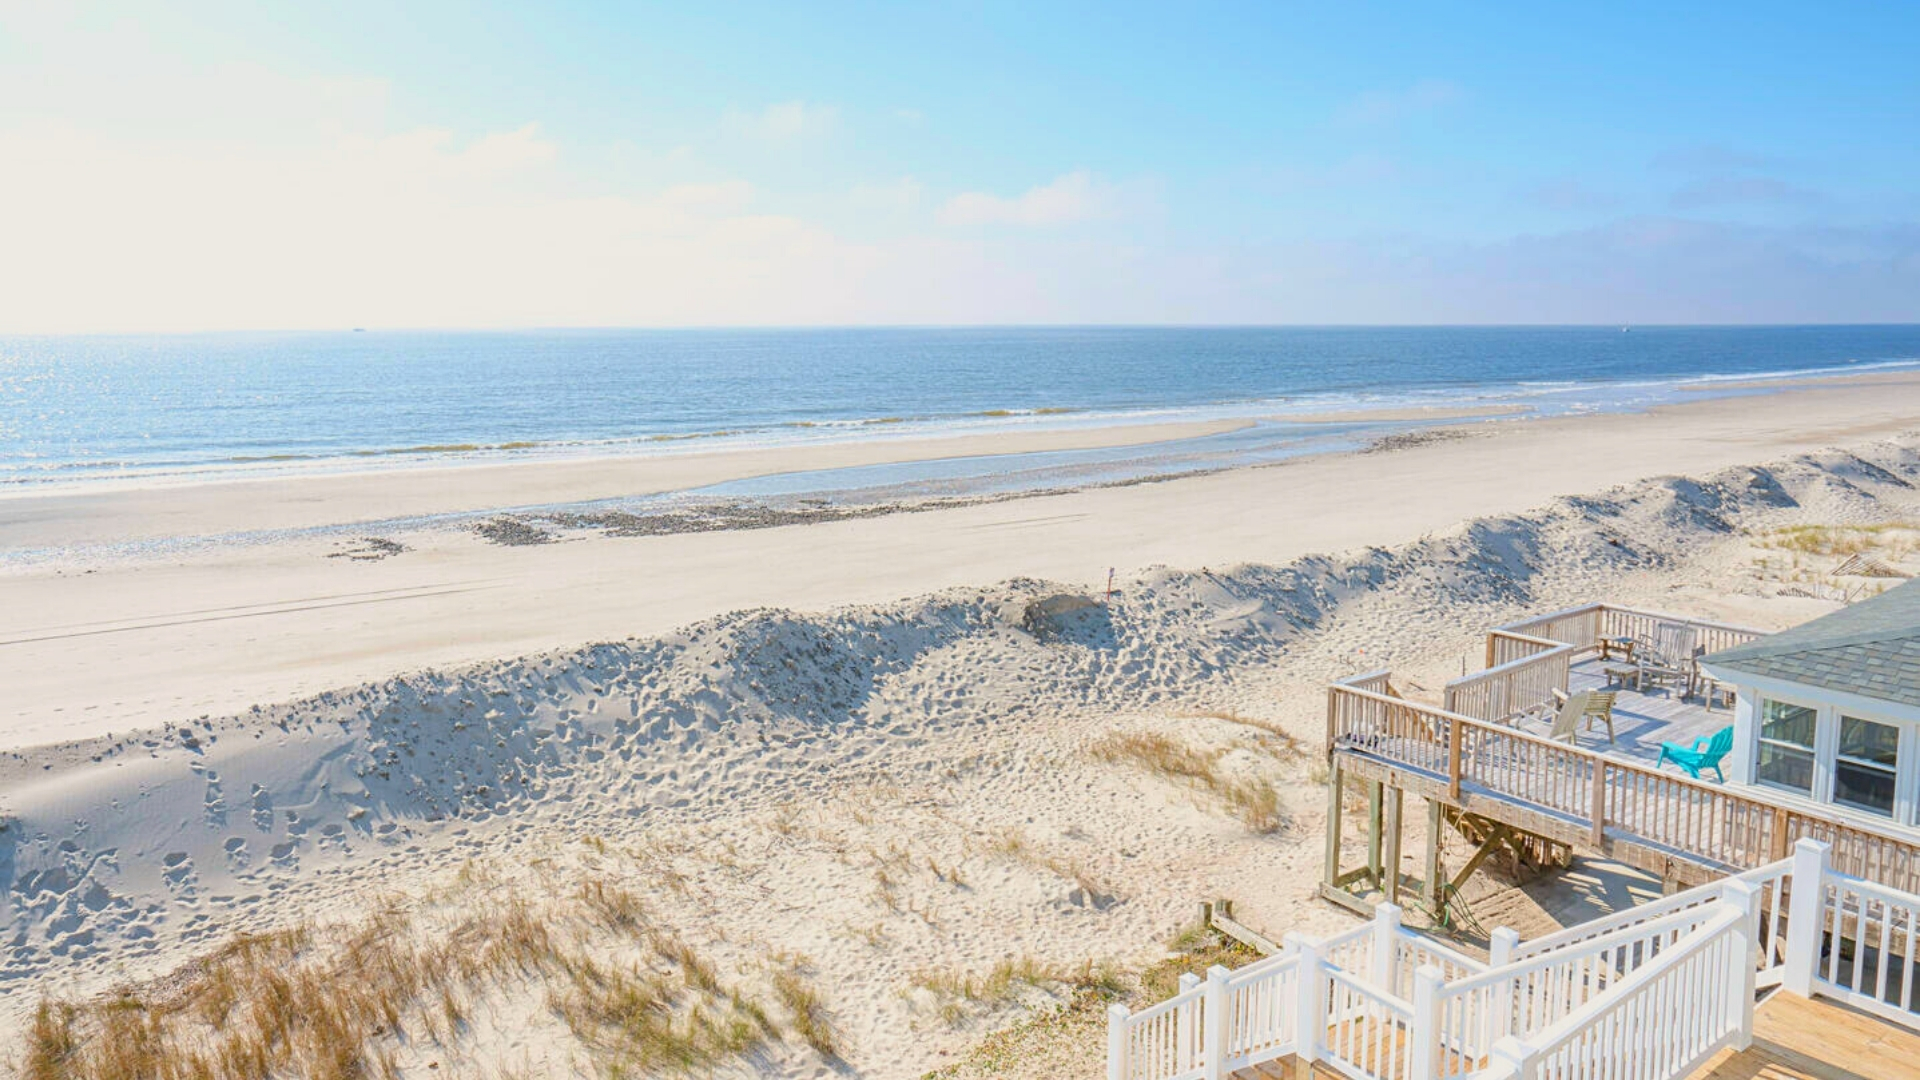 Visiting Oak Island in Autumn - Lower Rates & Fewer Crowds